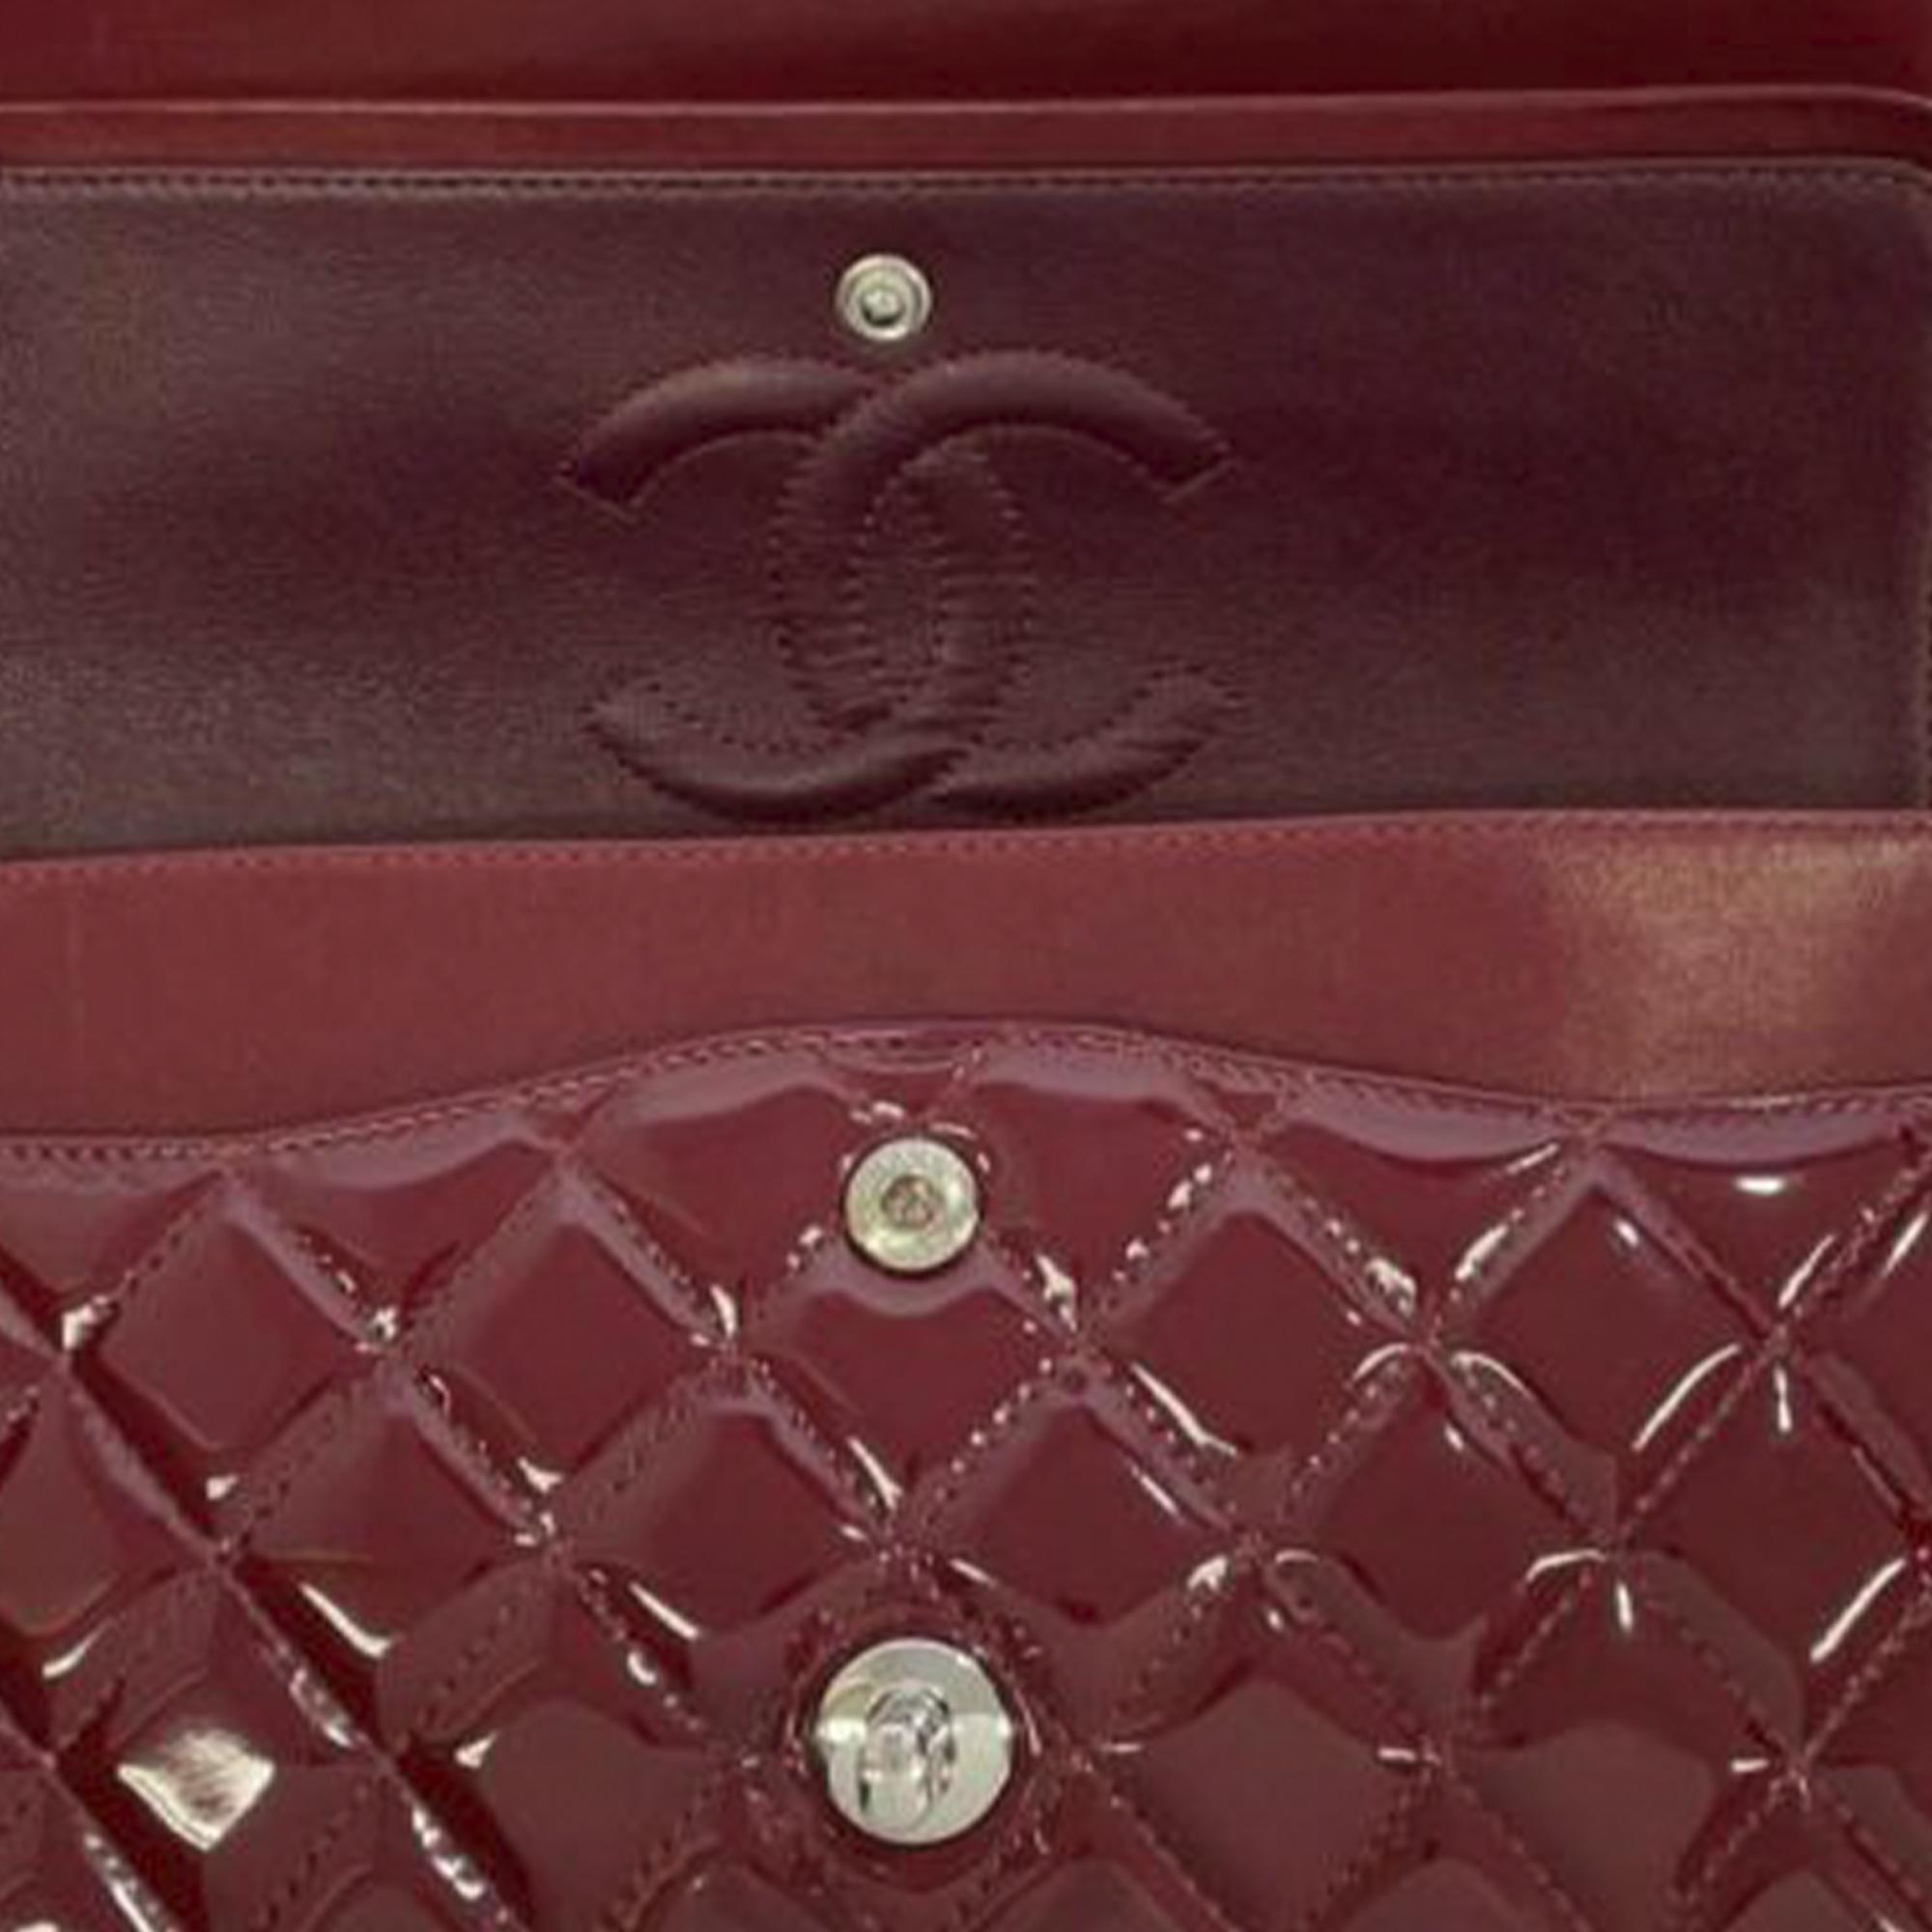 Chanel Red Medium Classic Patent Double Flap